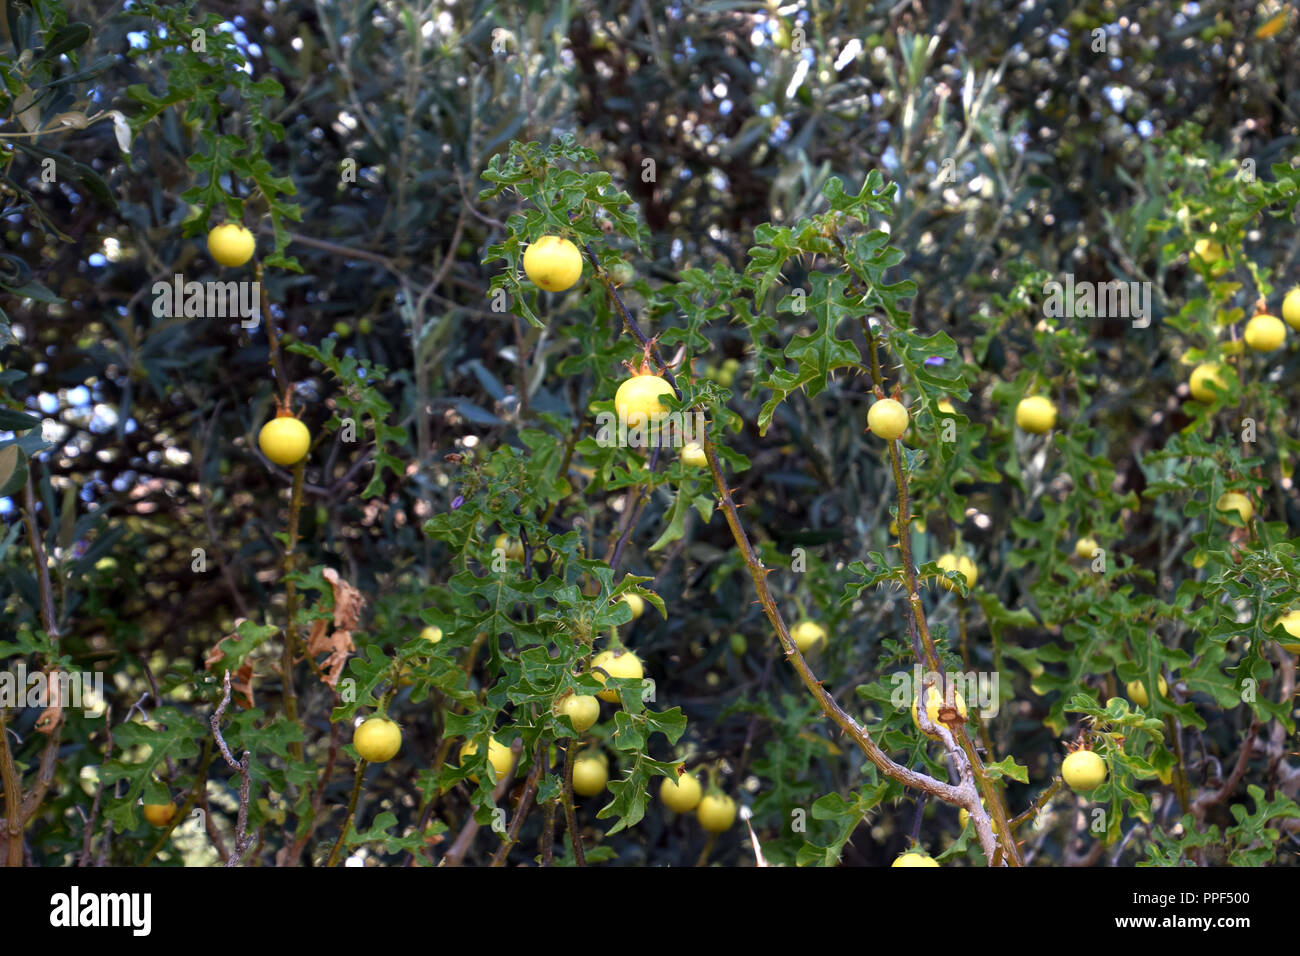 devil´s apple poisonous weed bearing tomato-like yellow ripe fruits, solanum linnaeanum shrub with ripe yellow fruits in late summer in sardinia Stock Photo